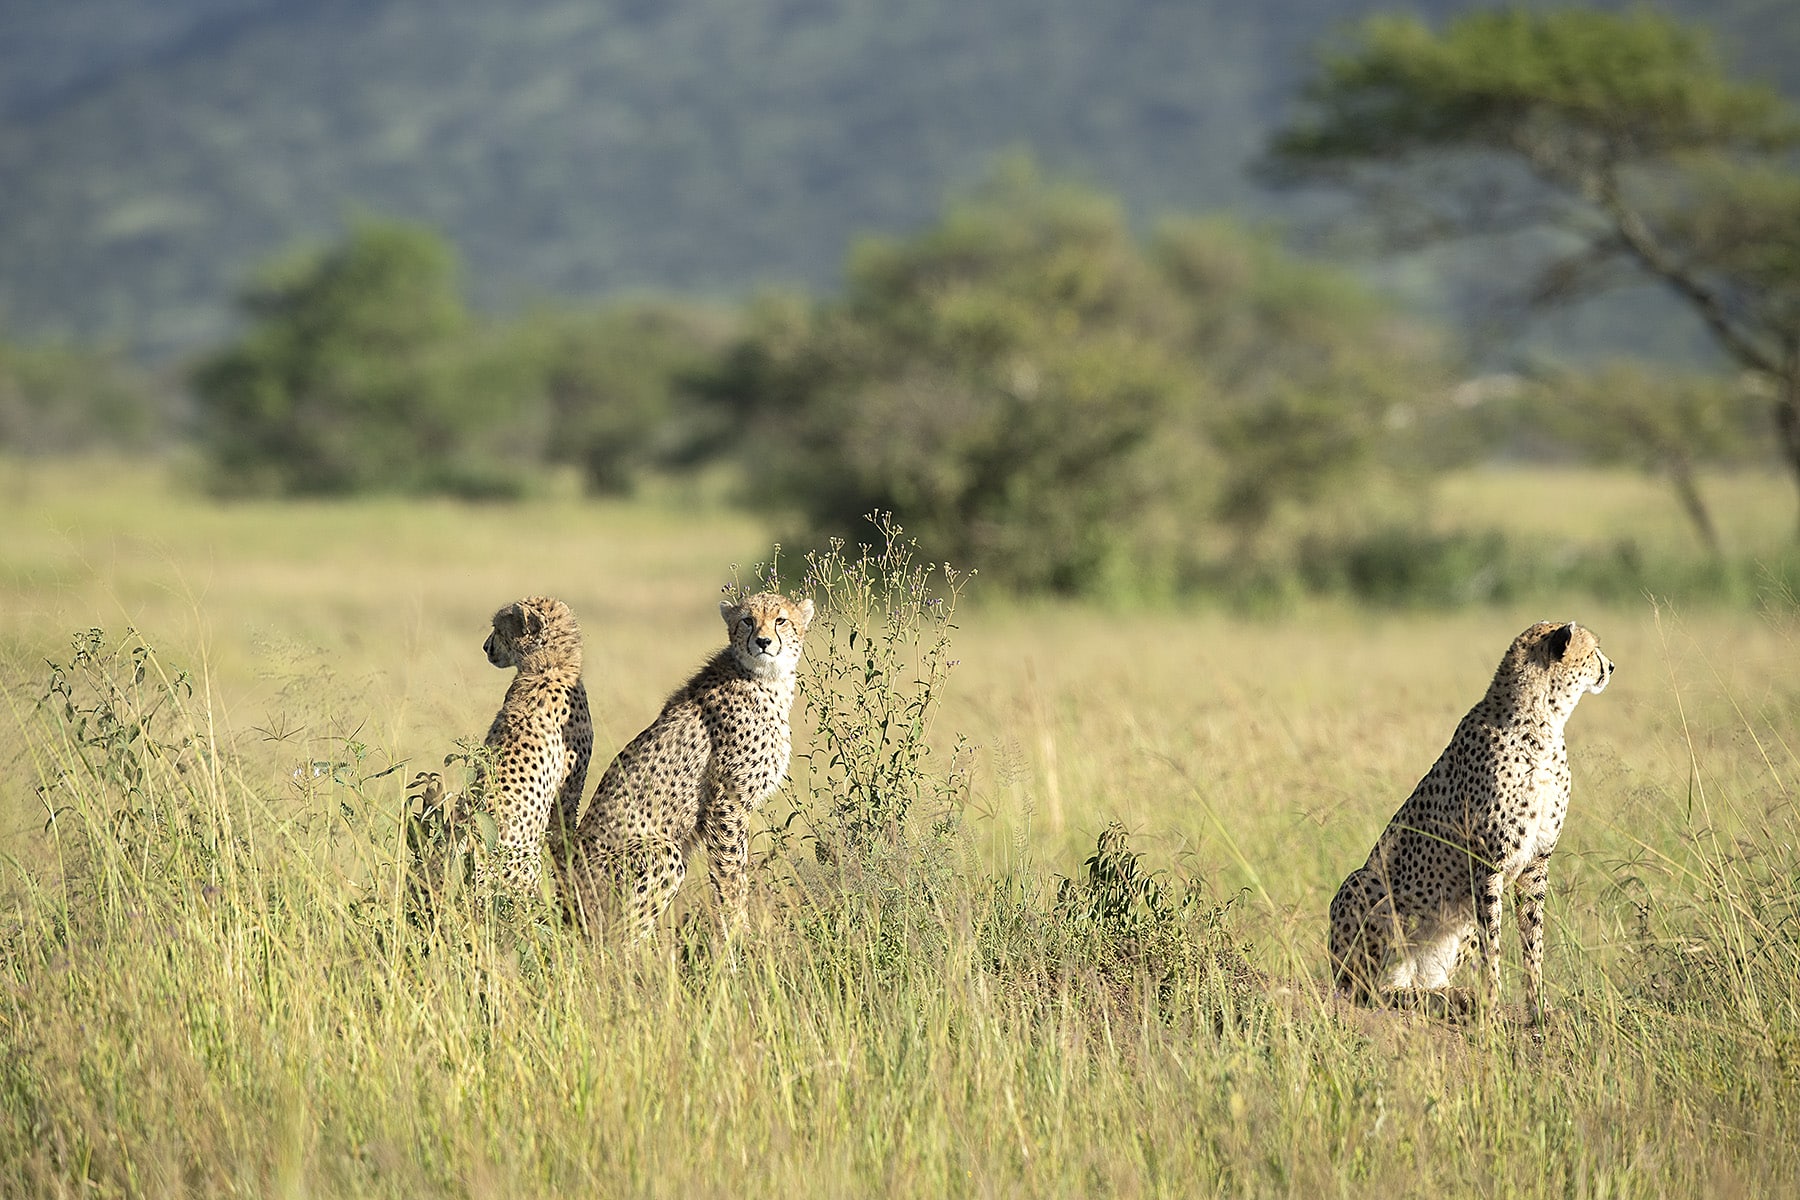 Experience the grace of three watchful cheetahs in the mesmerizing Serengeti National Park.